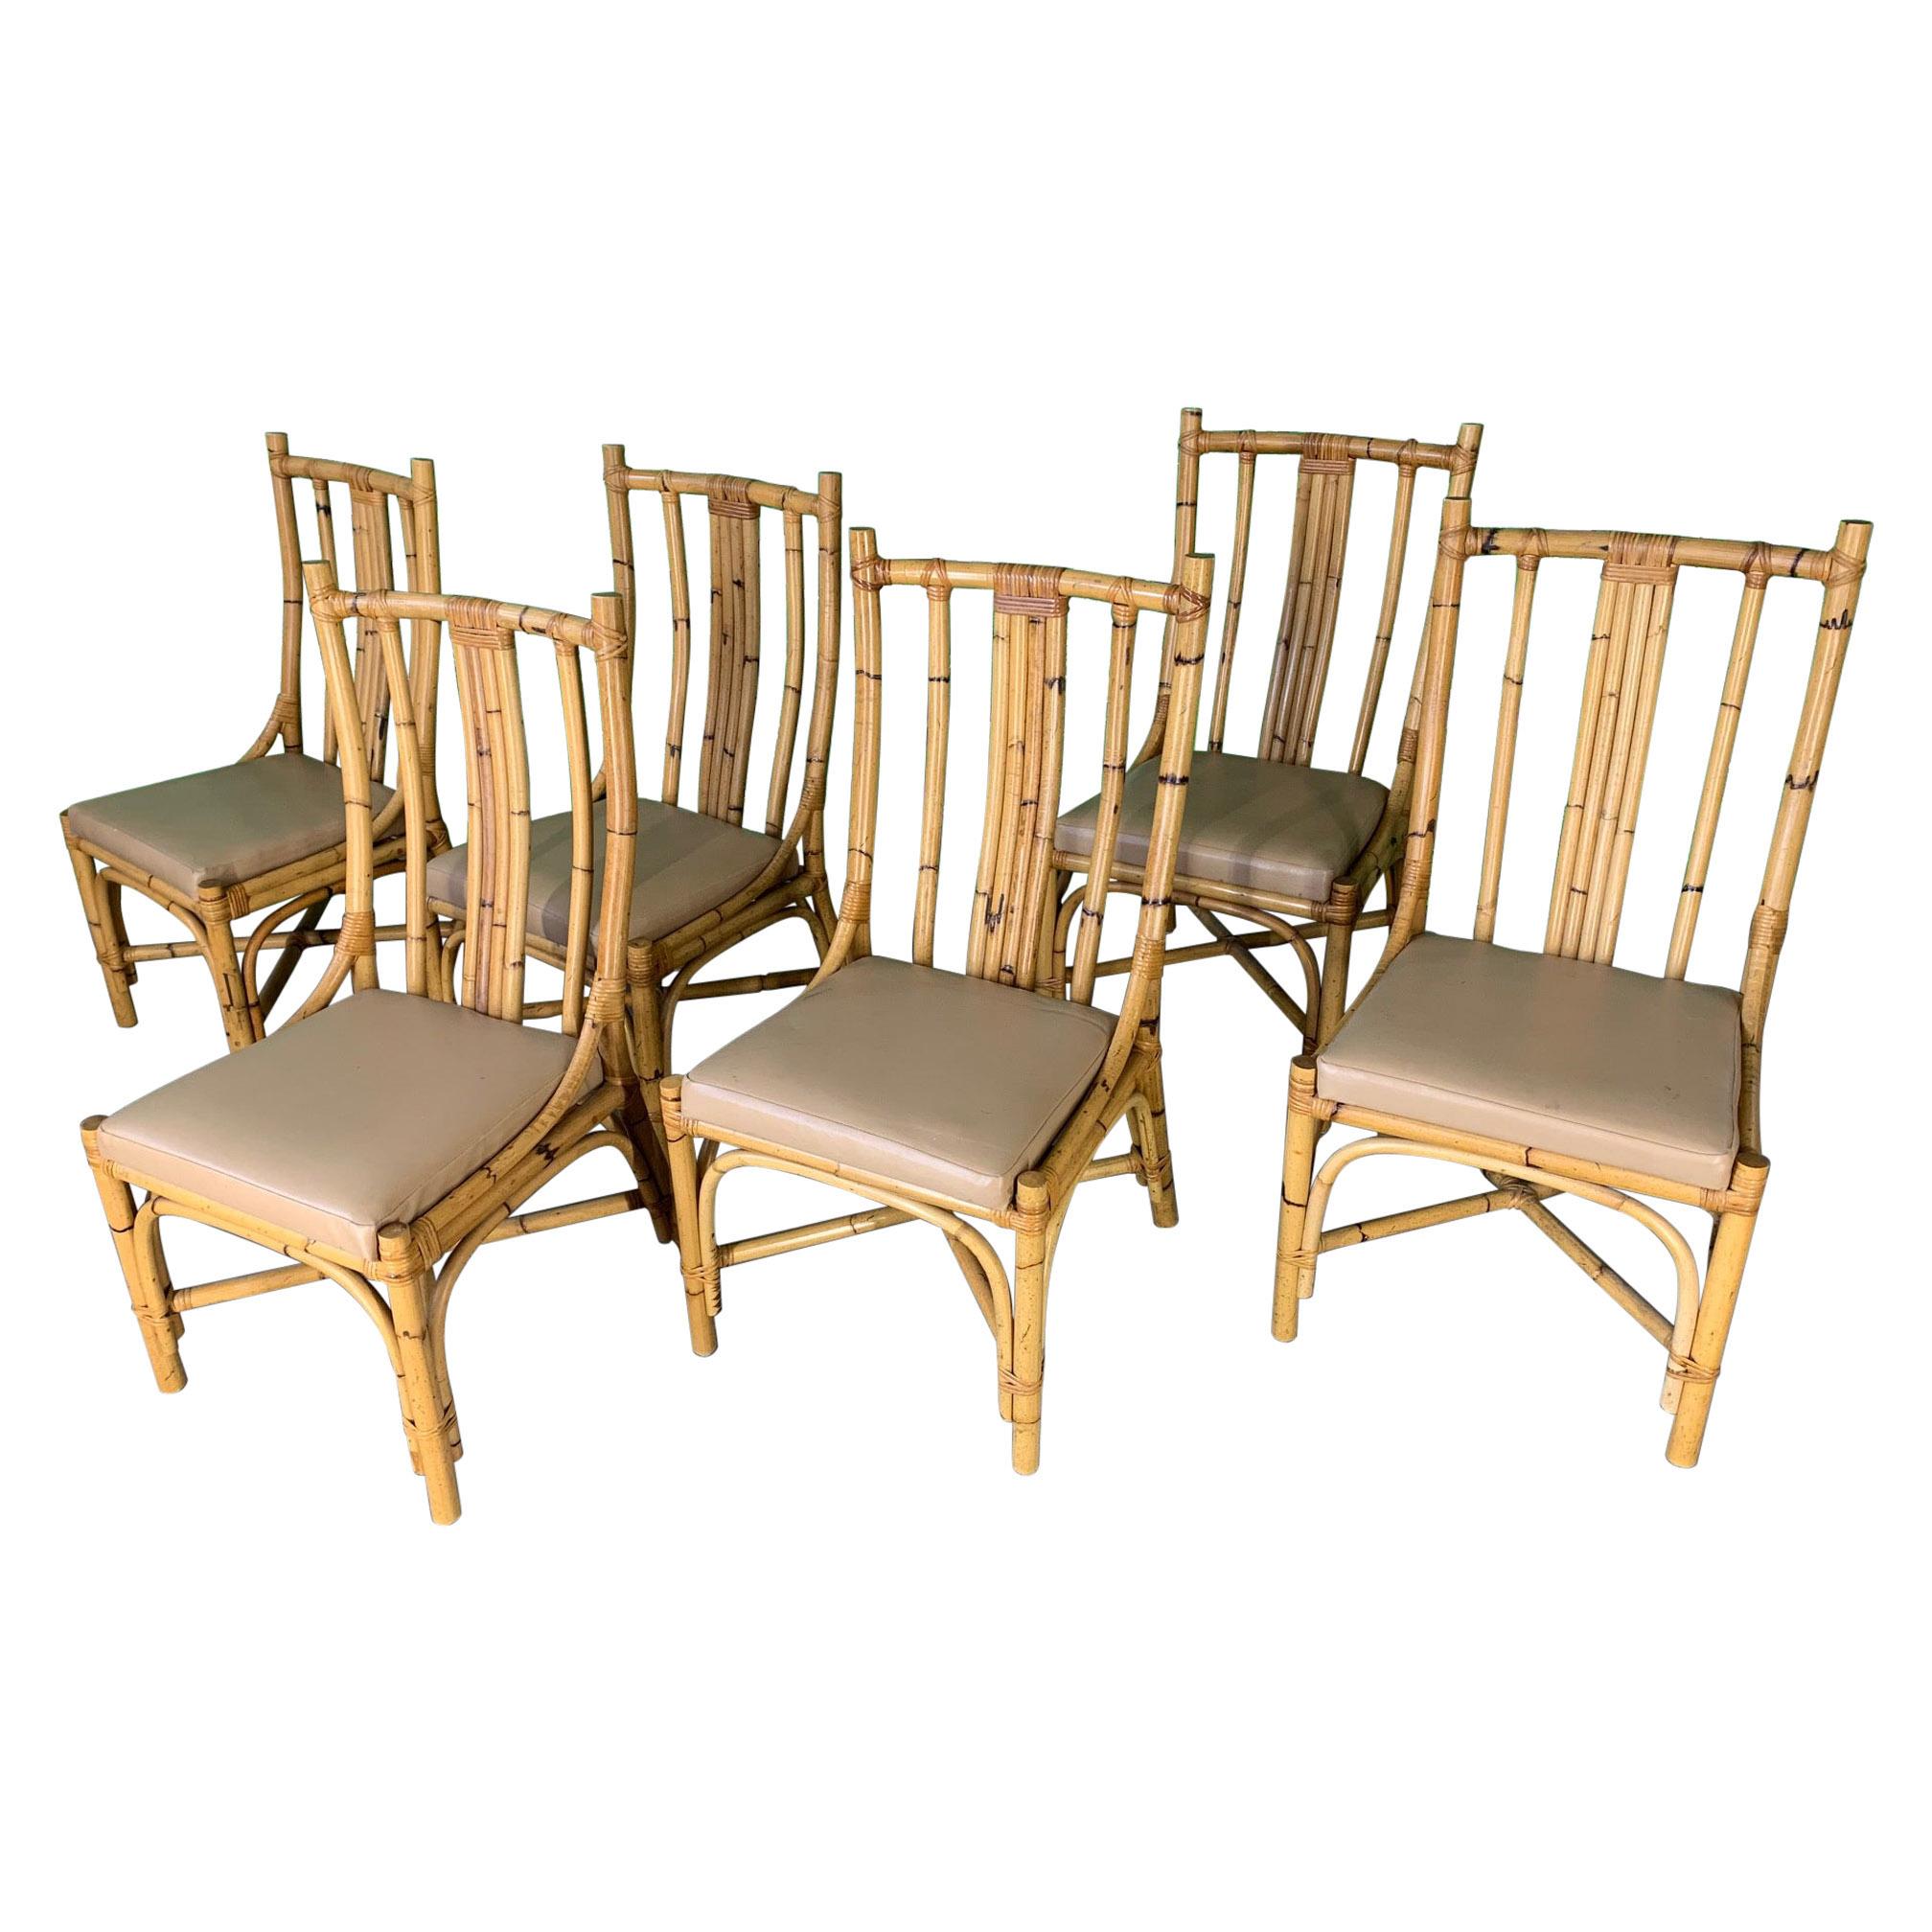 Sculptural Rattan Dining Chairs, Set of 6